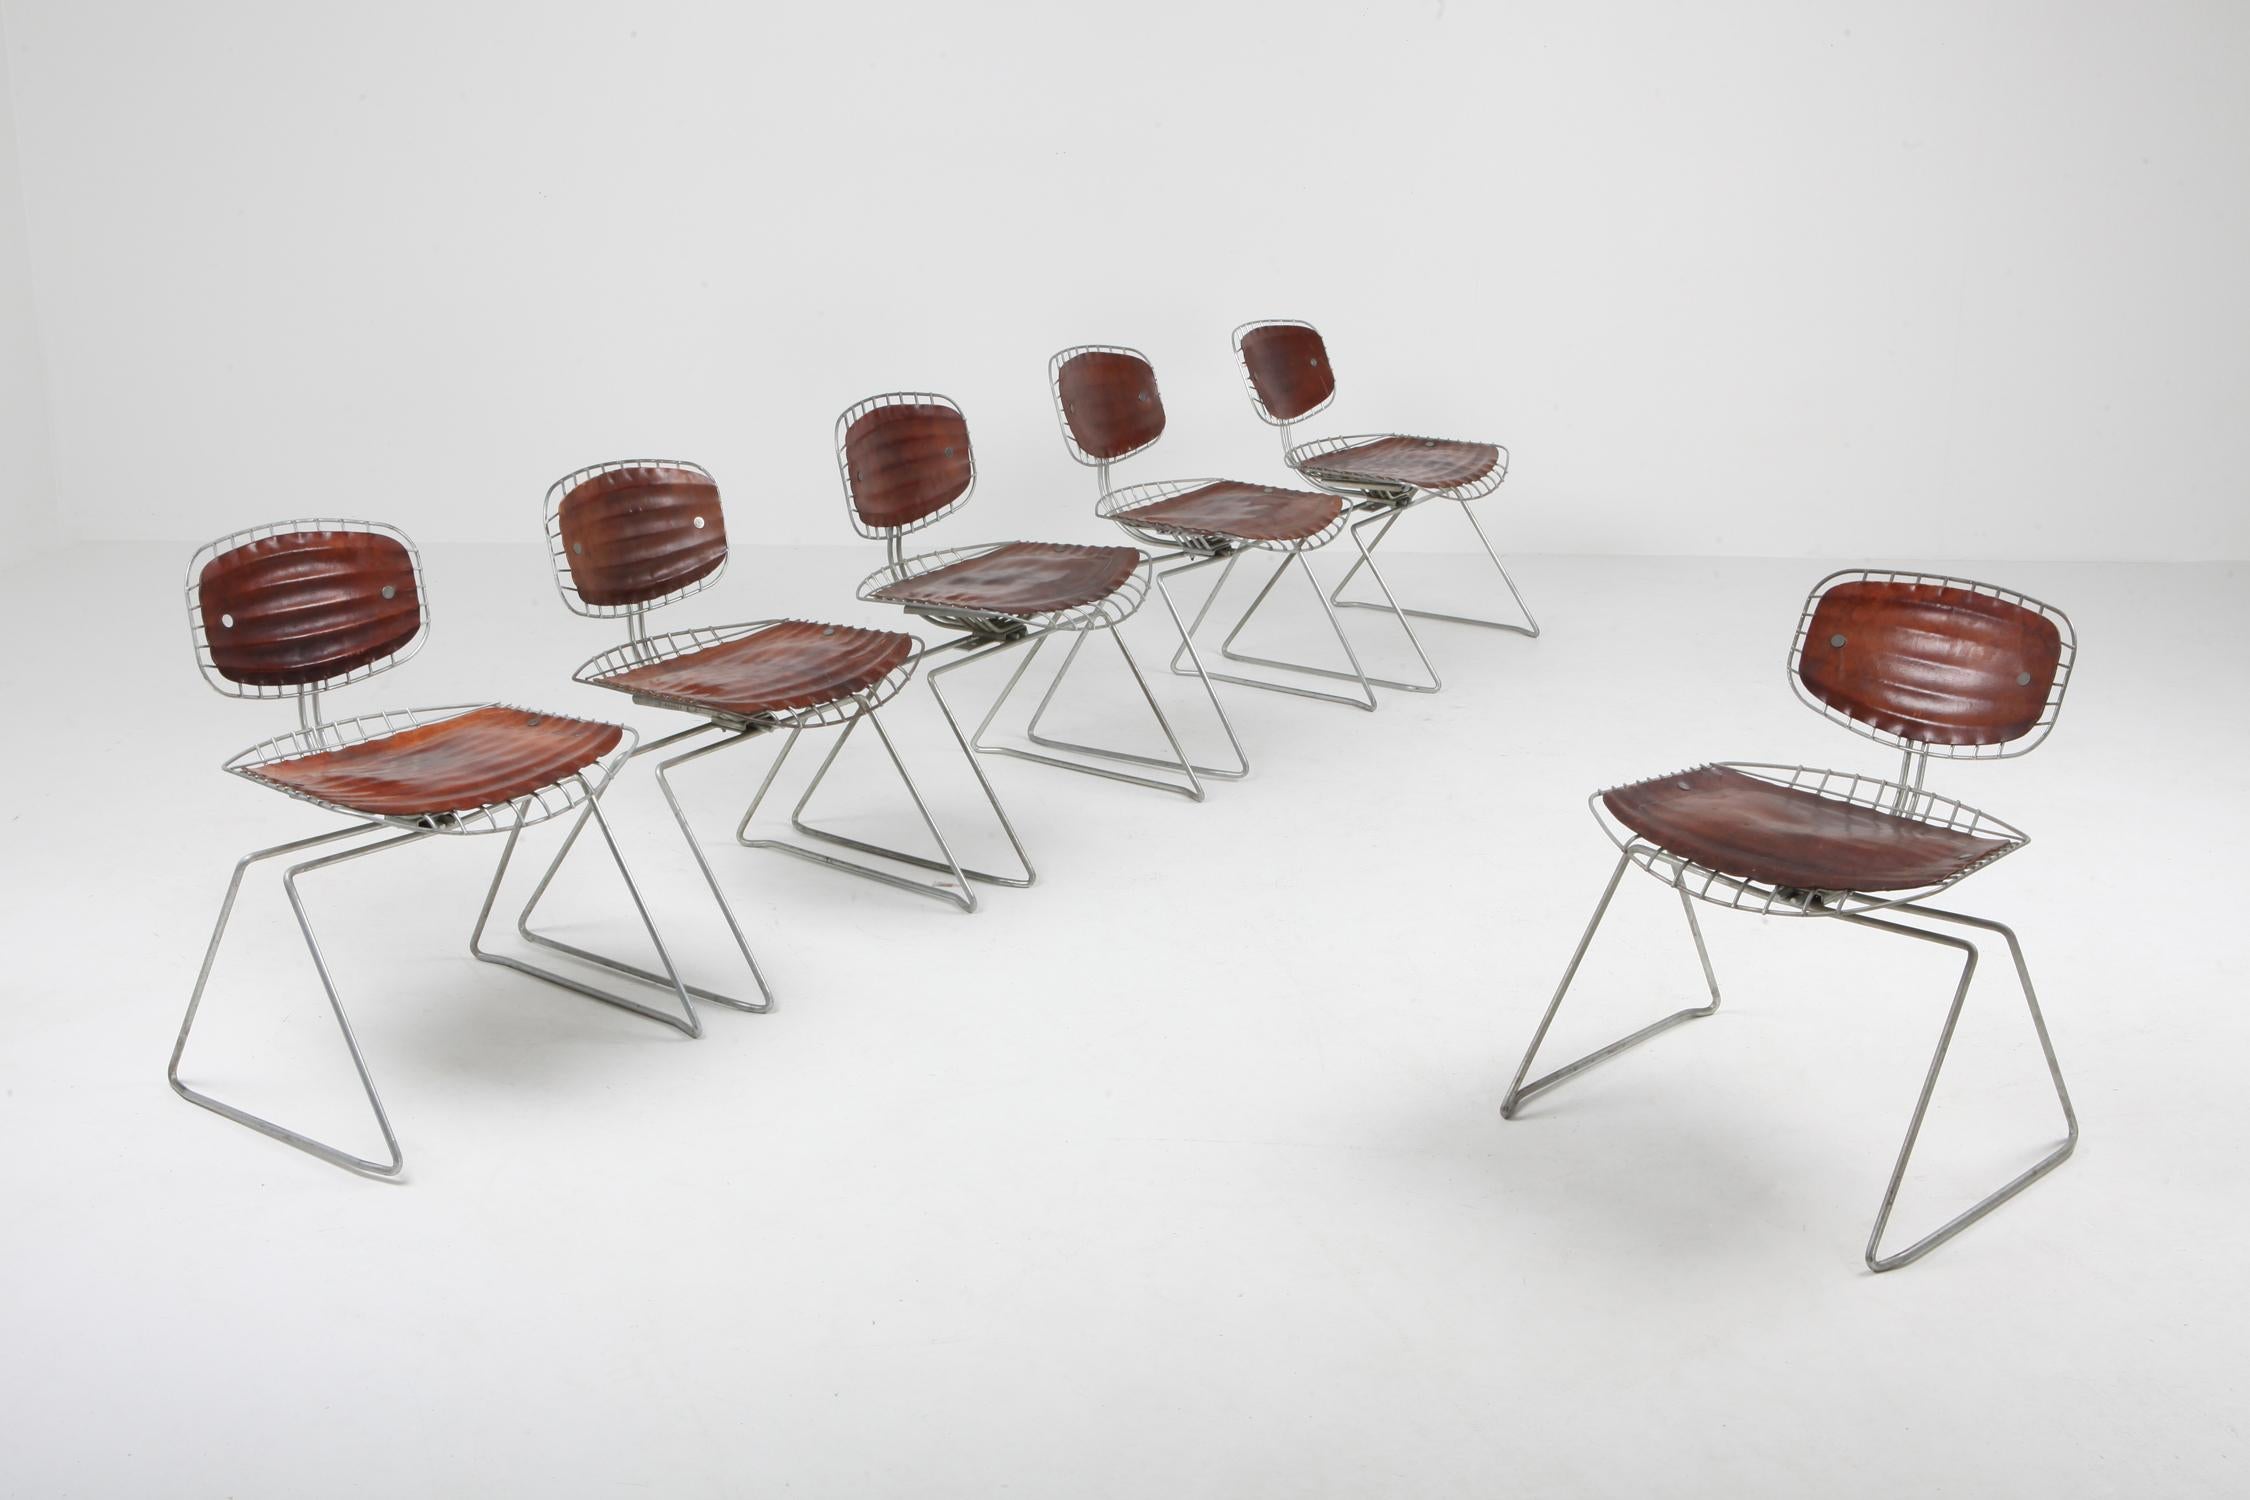 Mid-Century Modern Beaubourg wire chairs by Michel Cadestin and Georges Laurent.
These chairs were designed in 1976 for the competition to determine which chairs would be used in the Centre Pompidou art center. Jean Prouvé was the head of the